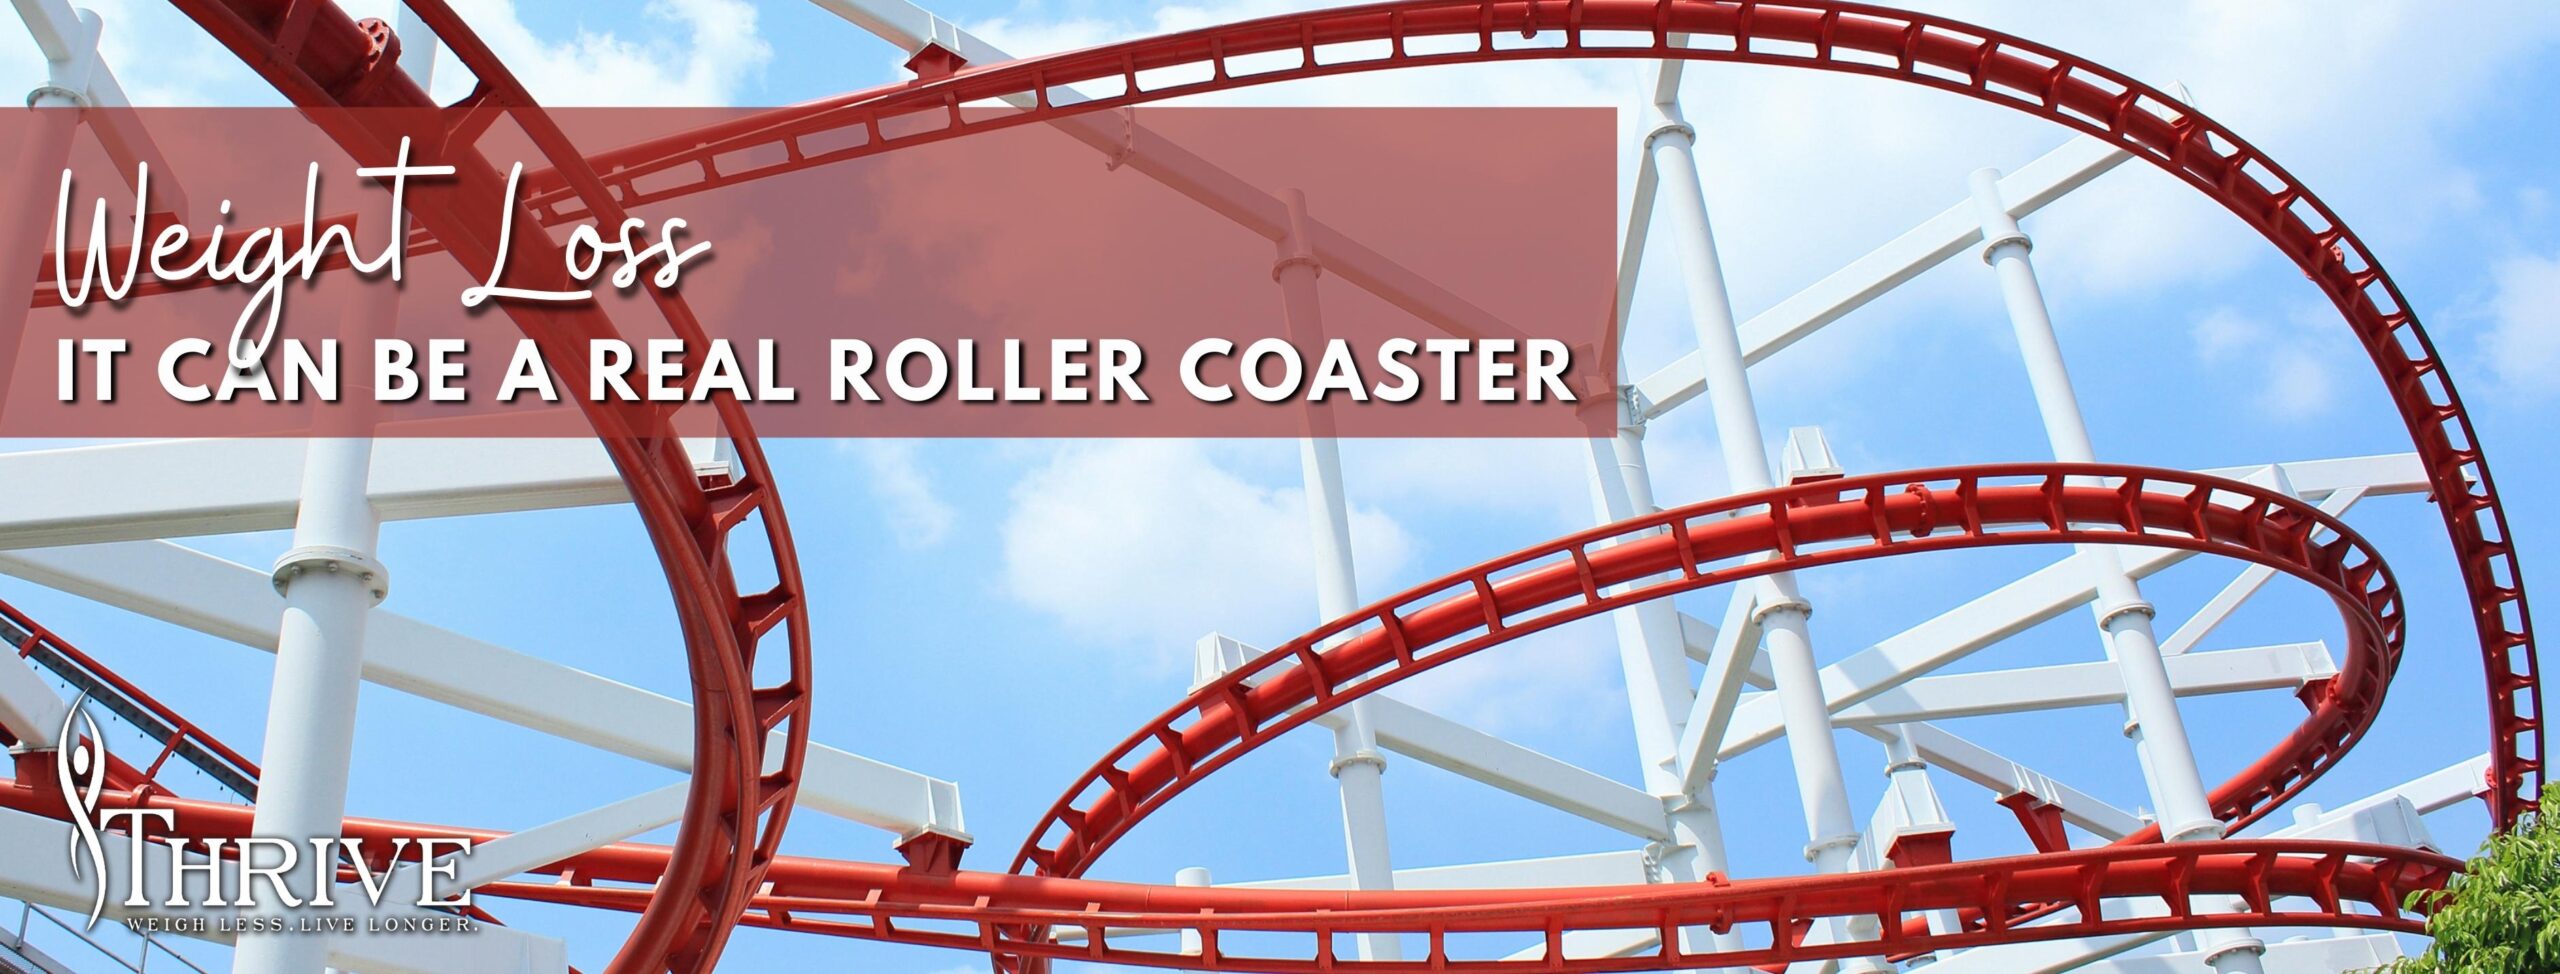 Weight Loss - Its a real roller coaster